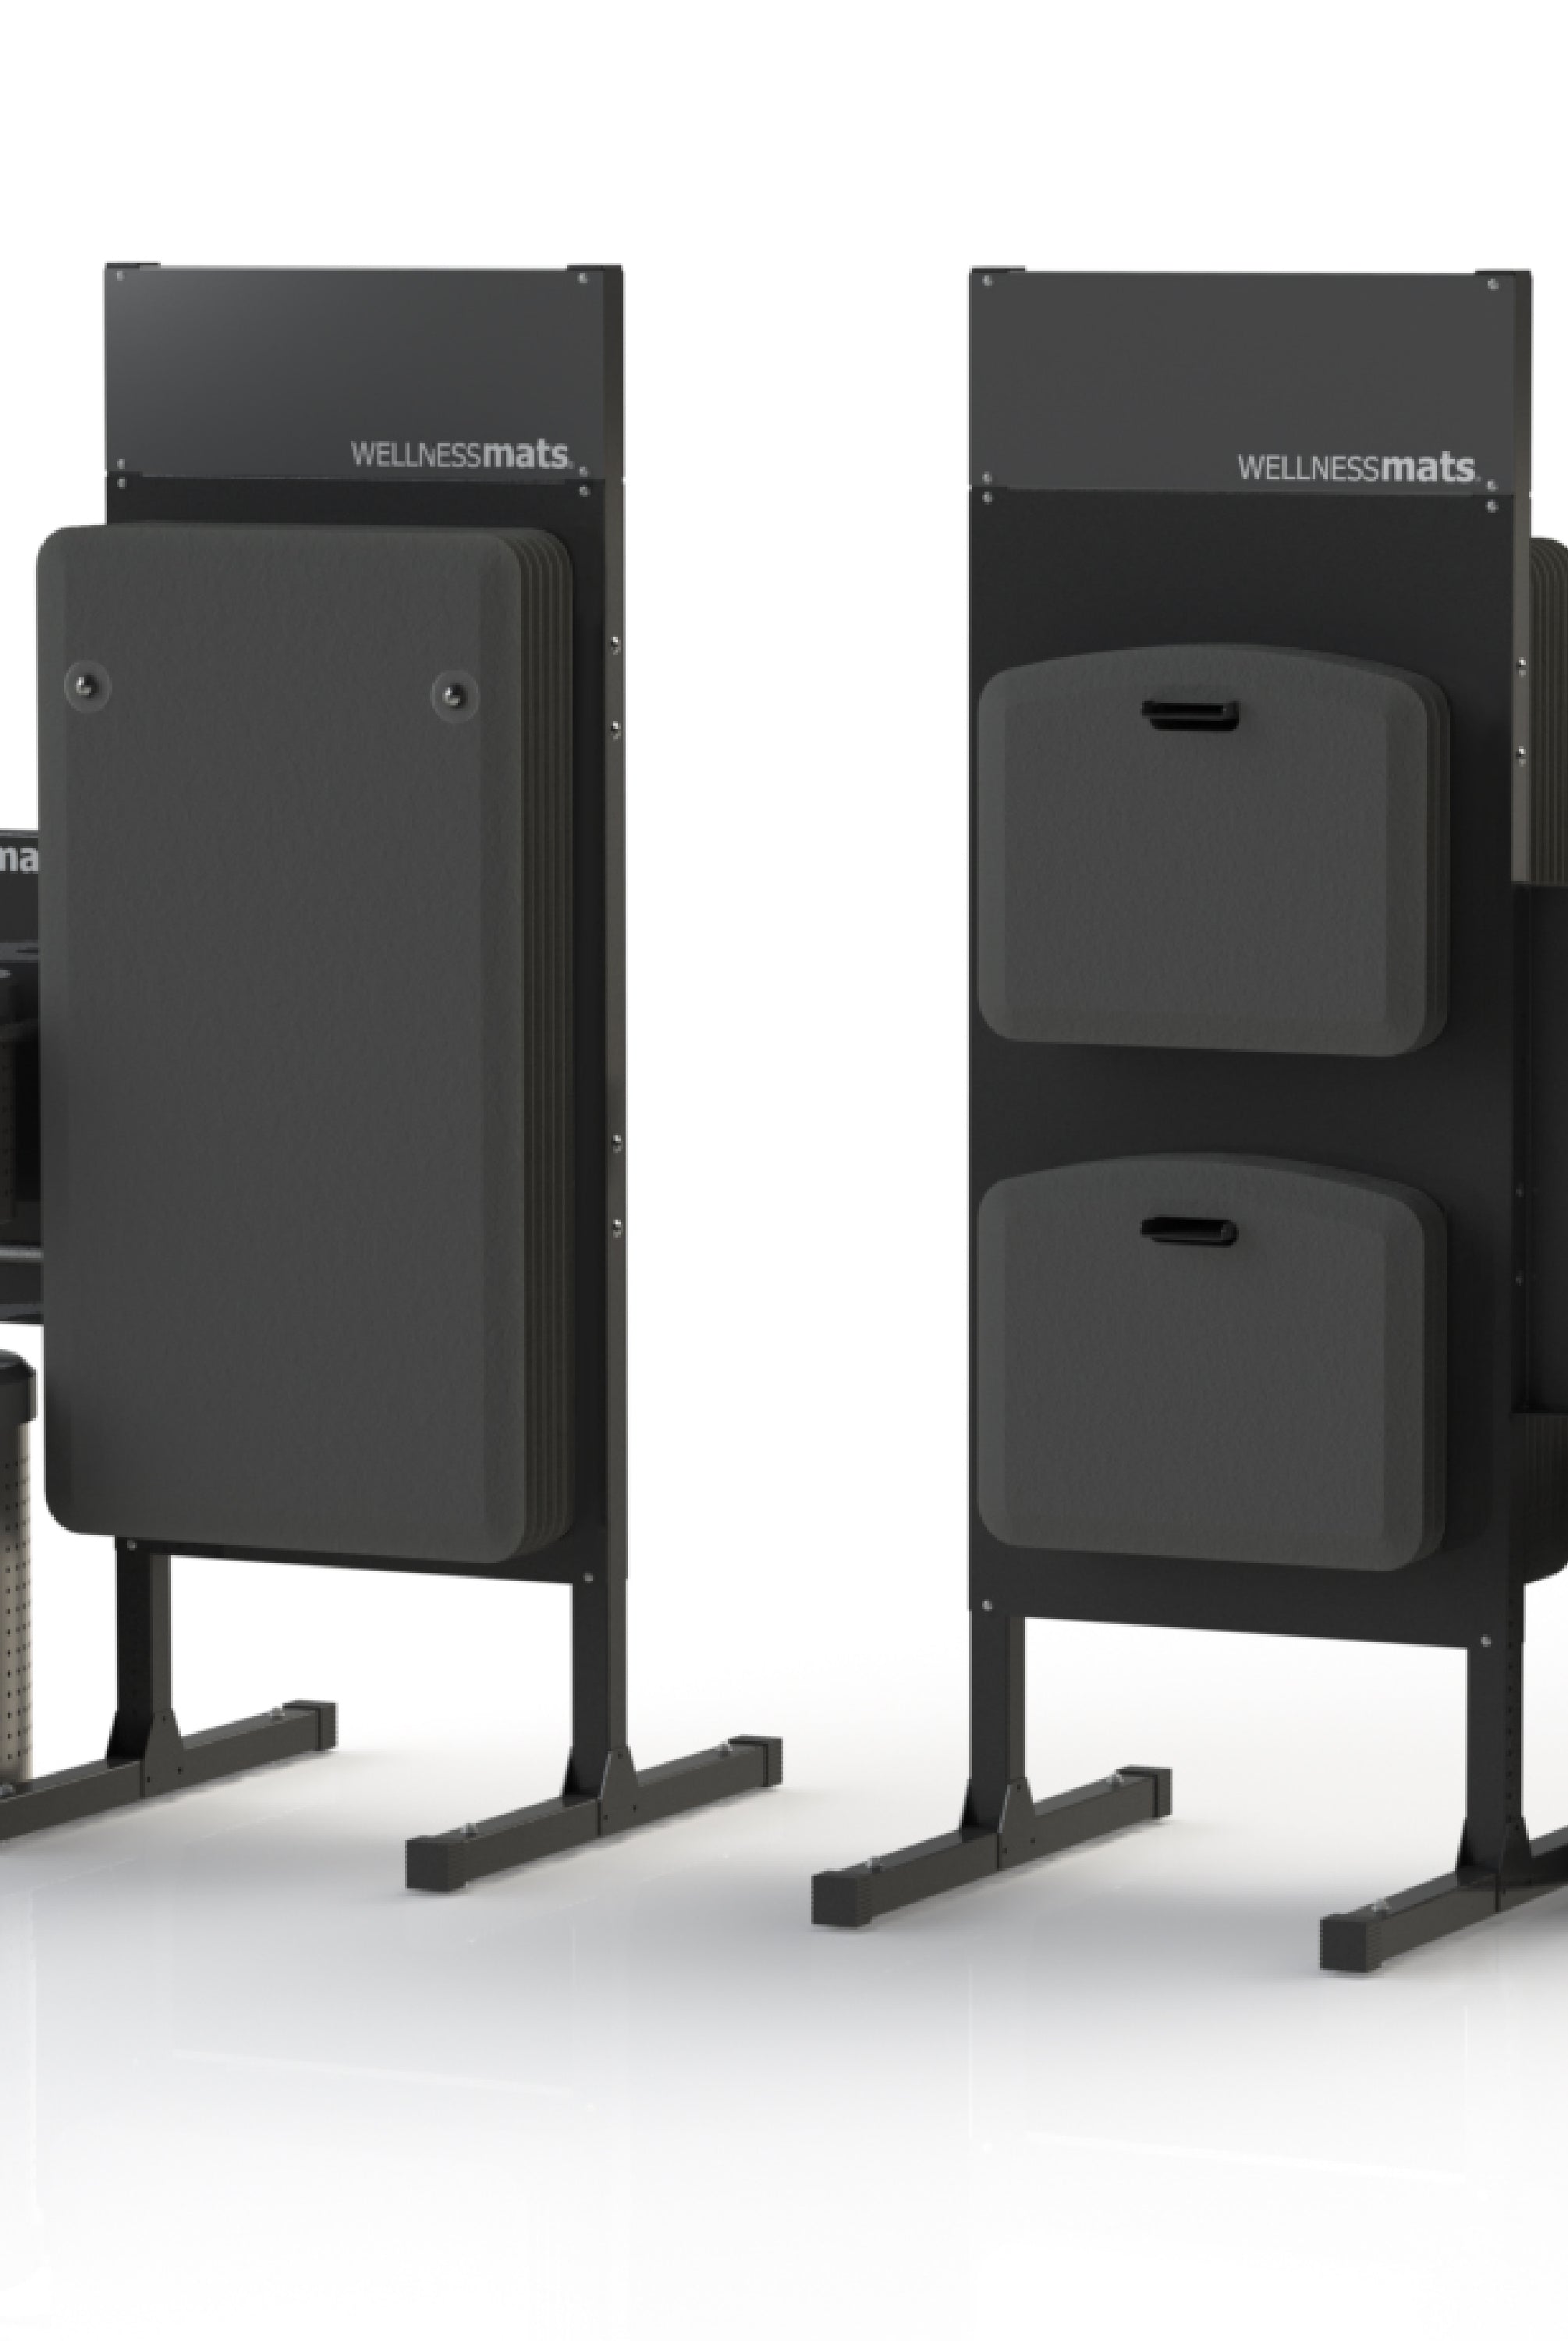 A standing sanitizing station that holds FitnessMats on one side and Mobile Mats on the other that includes a trash can and wipes.